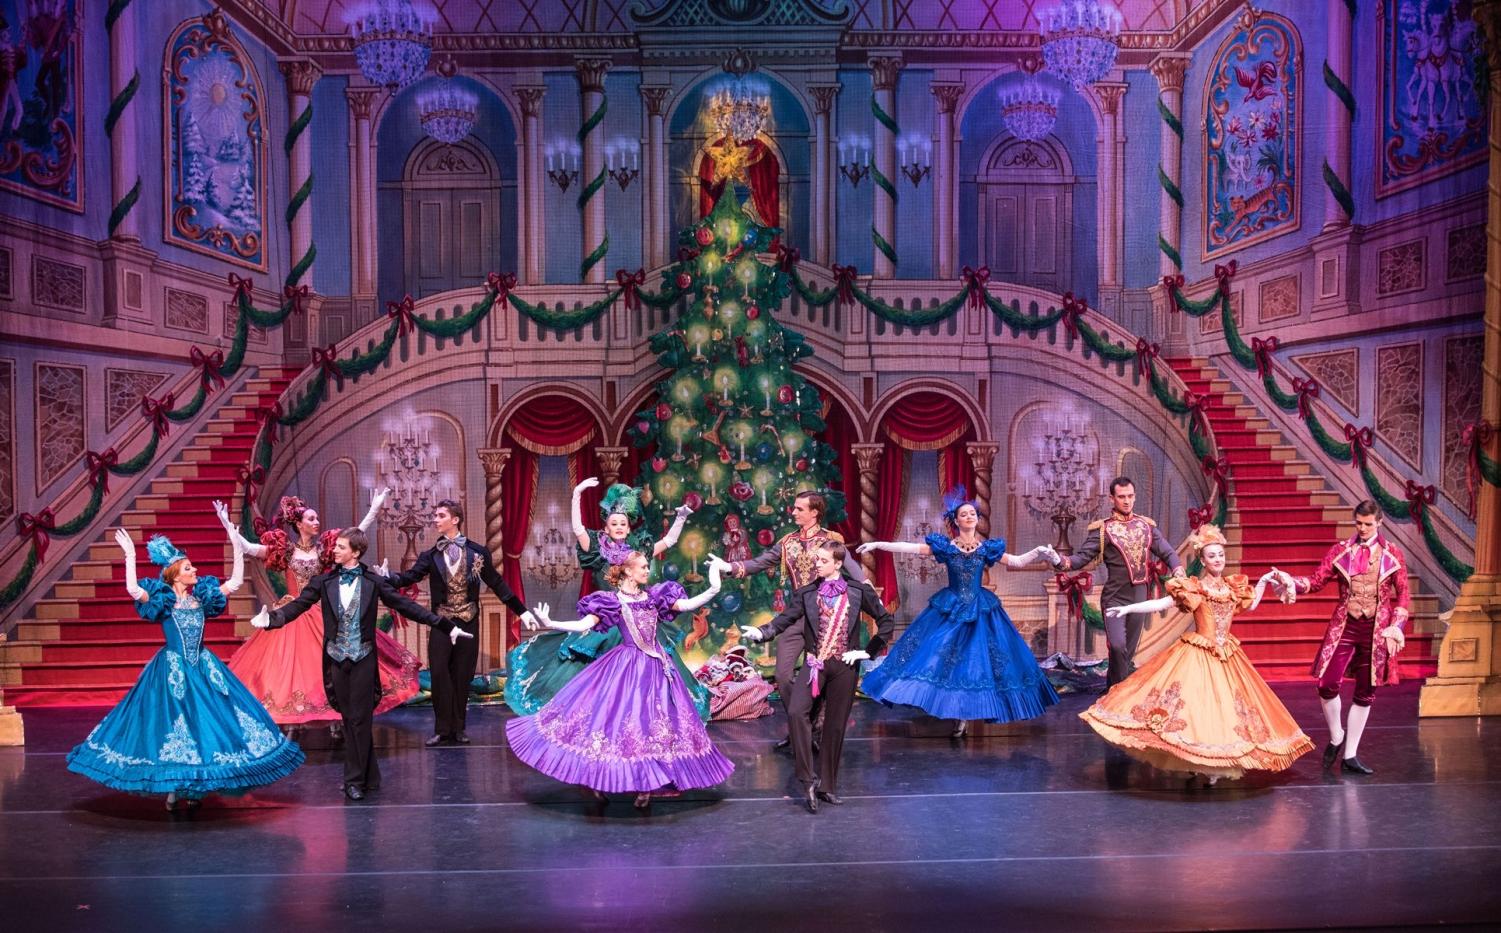 Rendition+of+The+Nutcracker+sweeps+the+Strathmore+stage